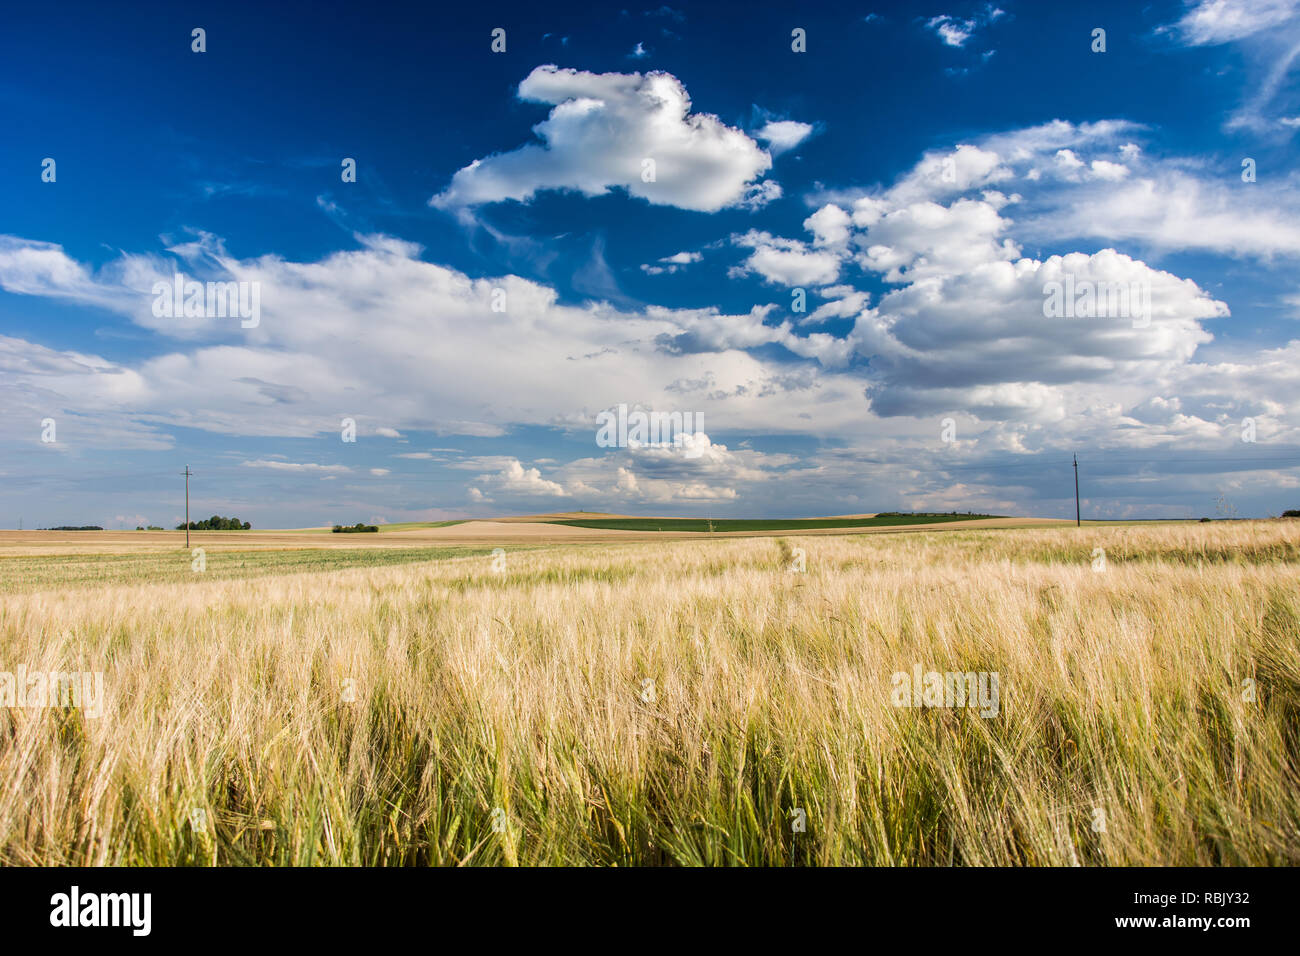 A large field of barley, horizon and clouds on a blue sky Stock Photo